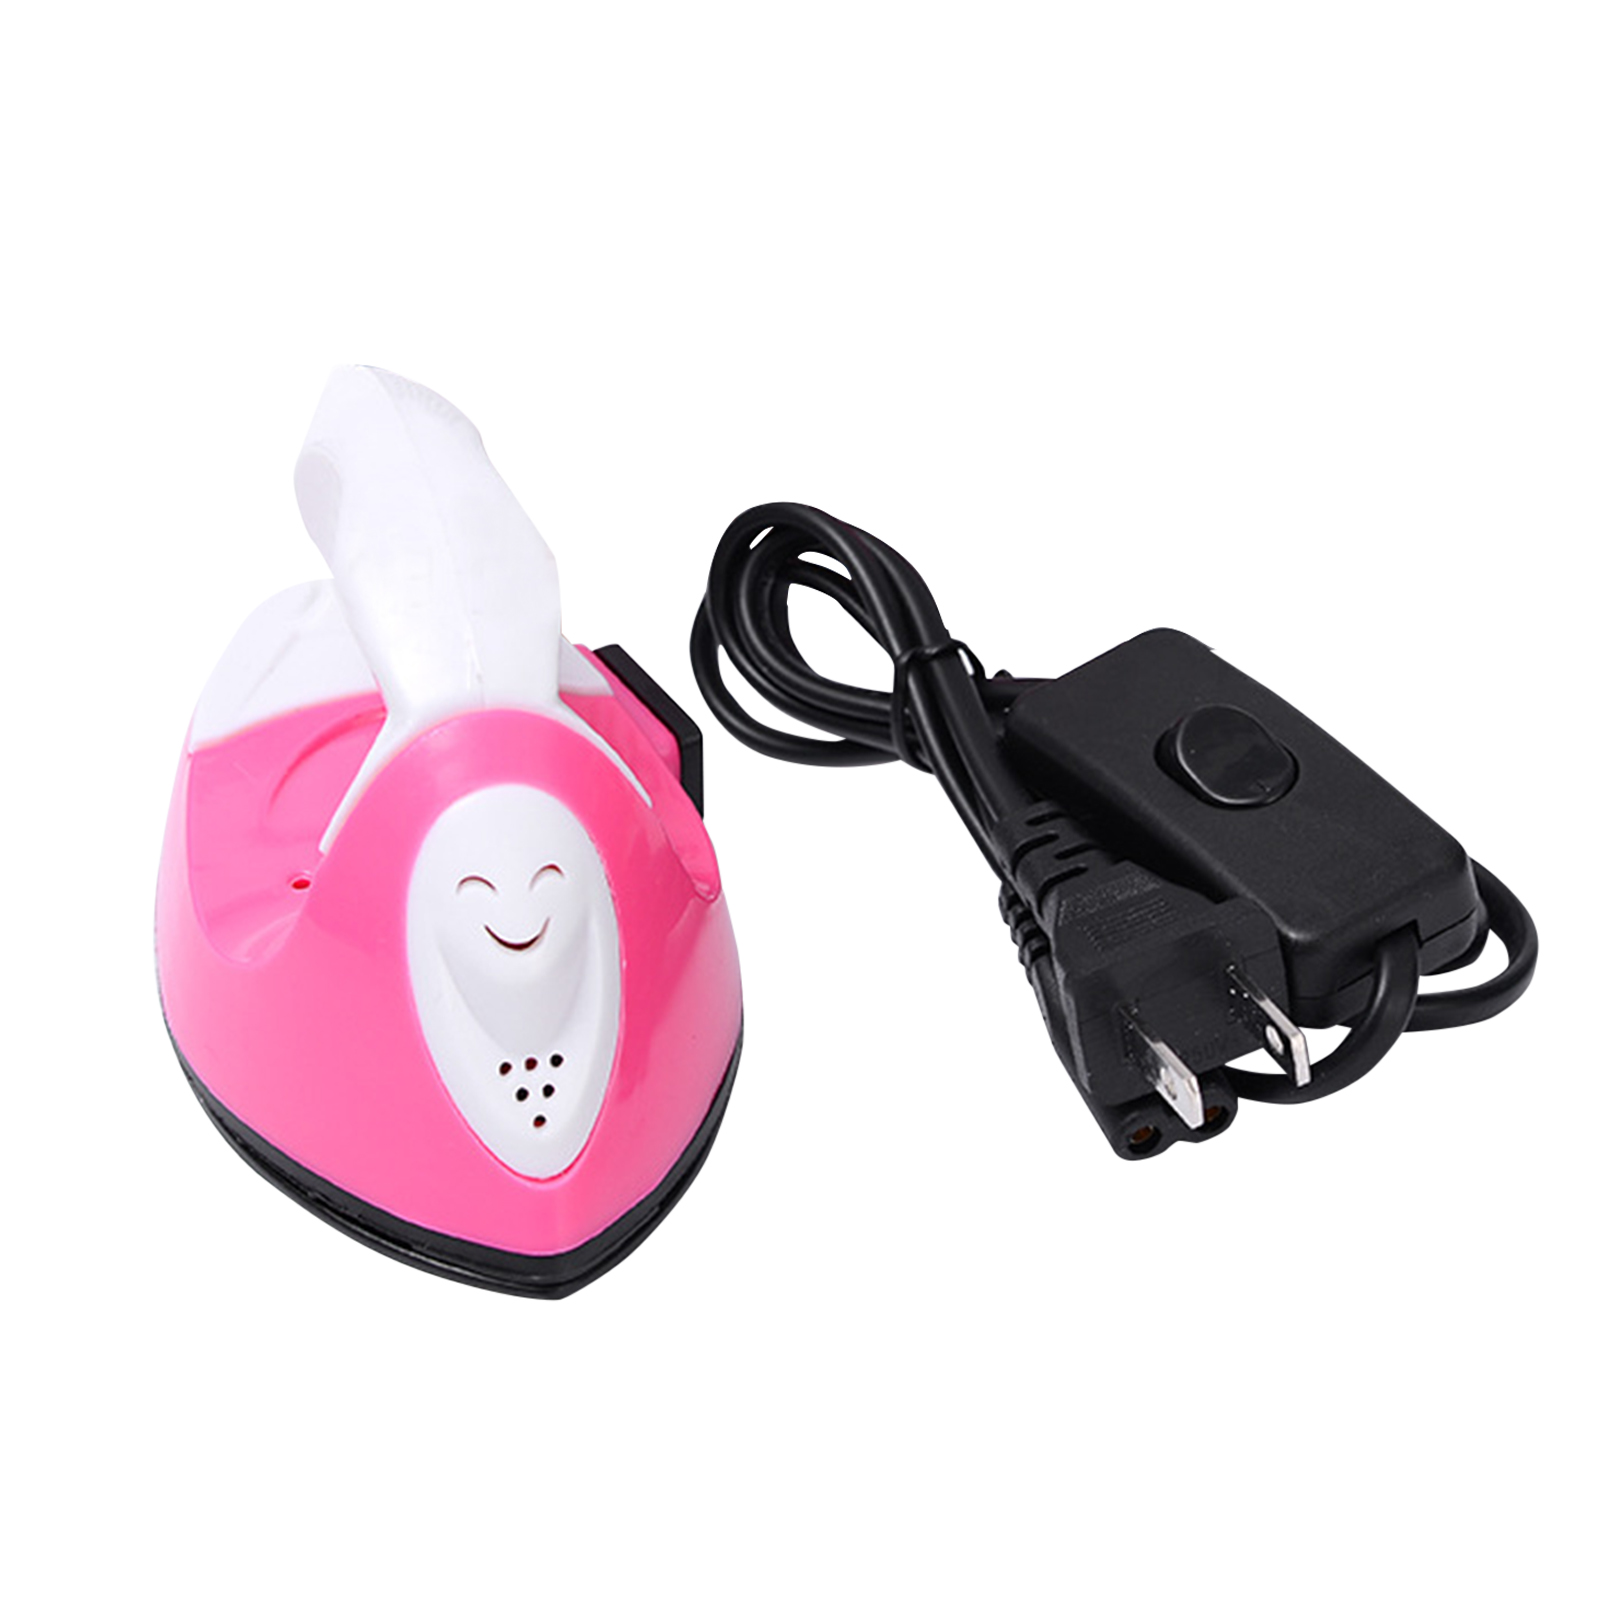 Mini Heat Press Small Iron Portable Heat Press Machine Mini Craft Iron with Charging Base Accessories for DIY T-Shirts, Shoes, Bag and Hats Heat